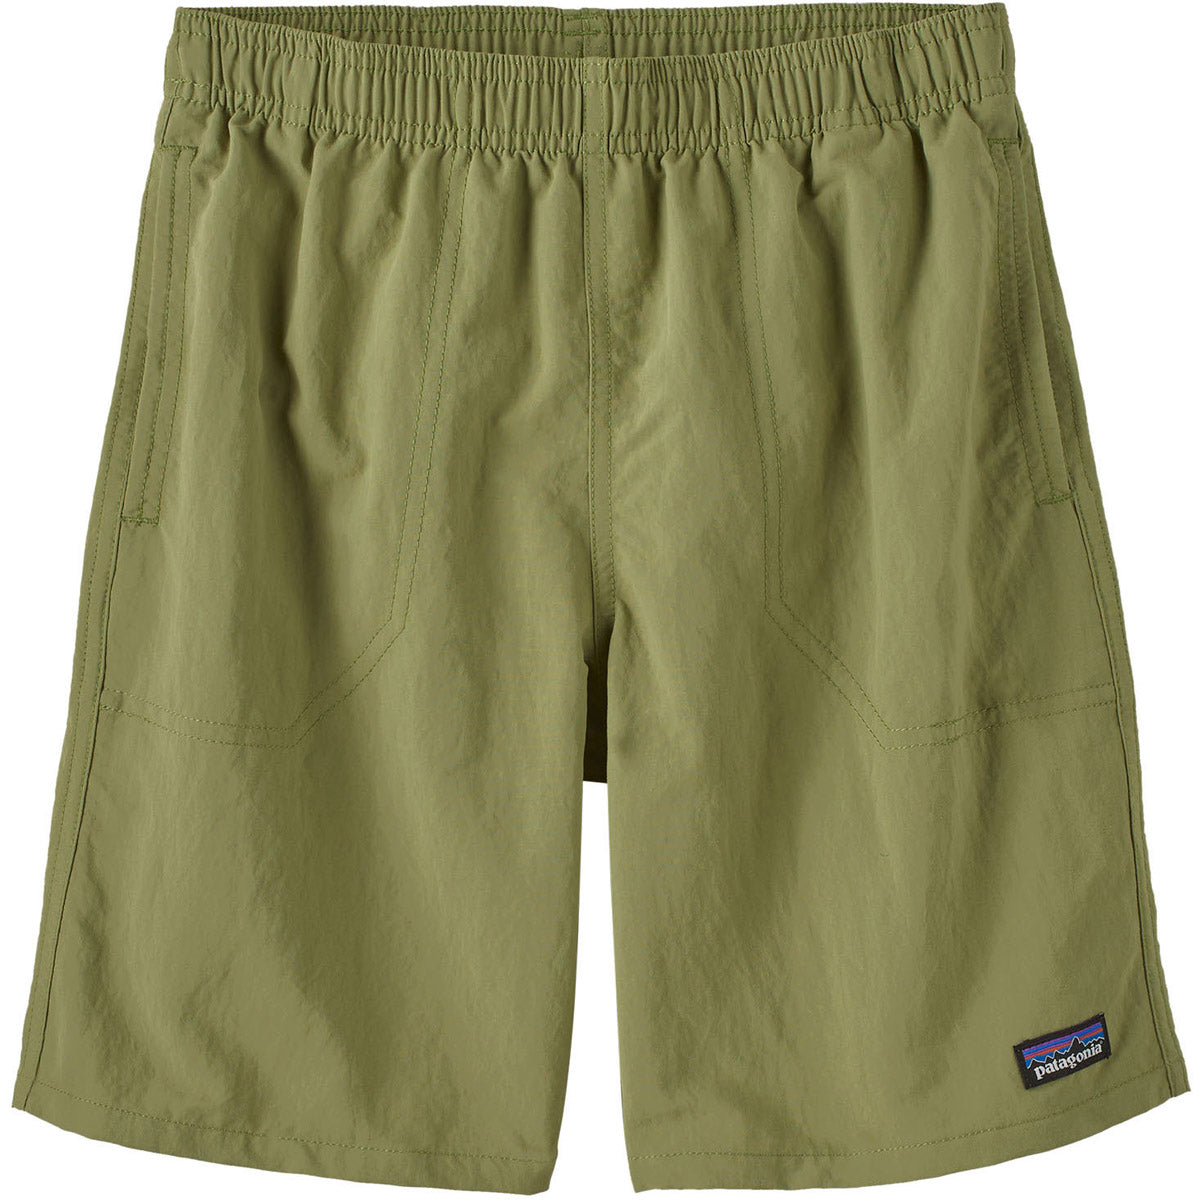 Kids' Baggies Shorts 7 " - Lined